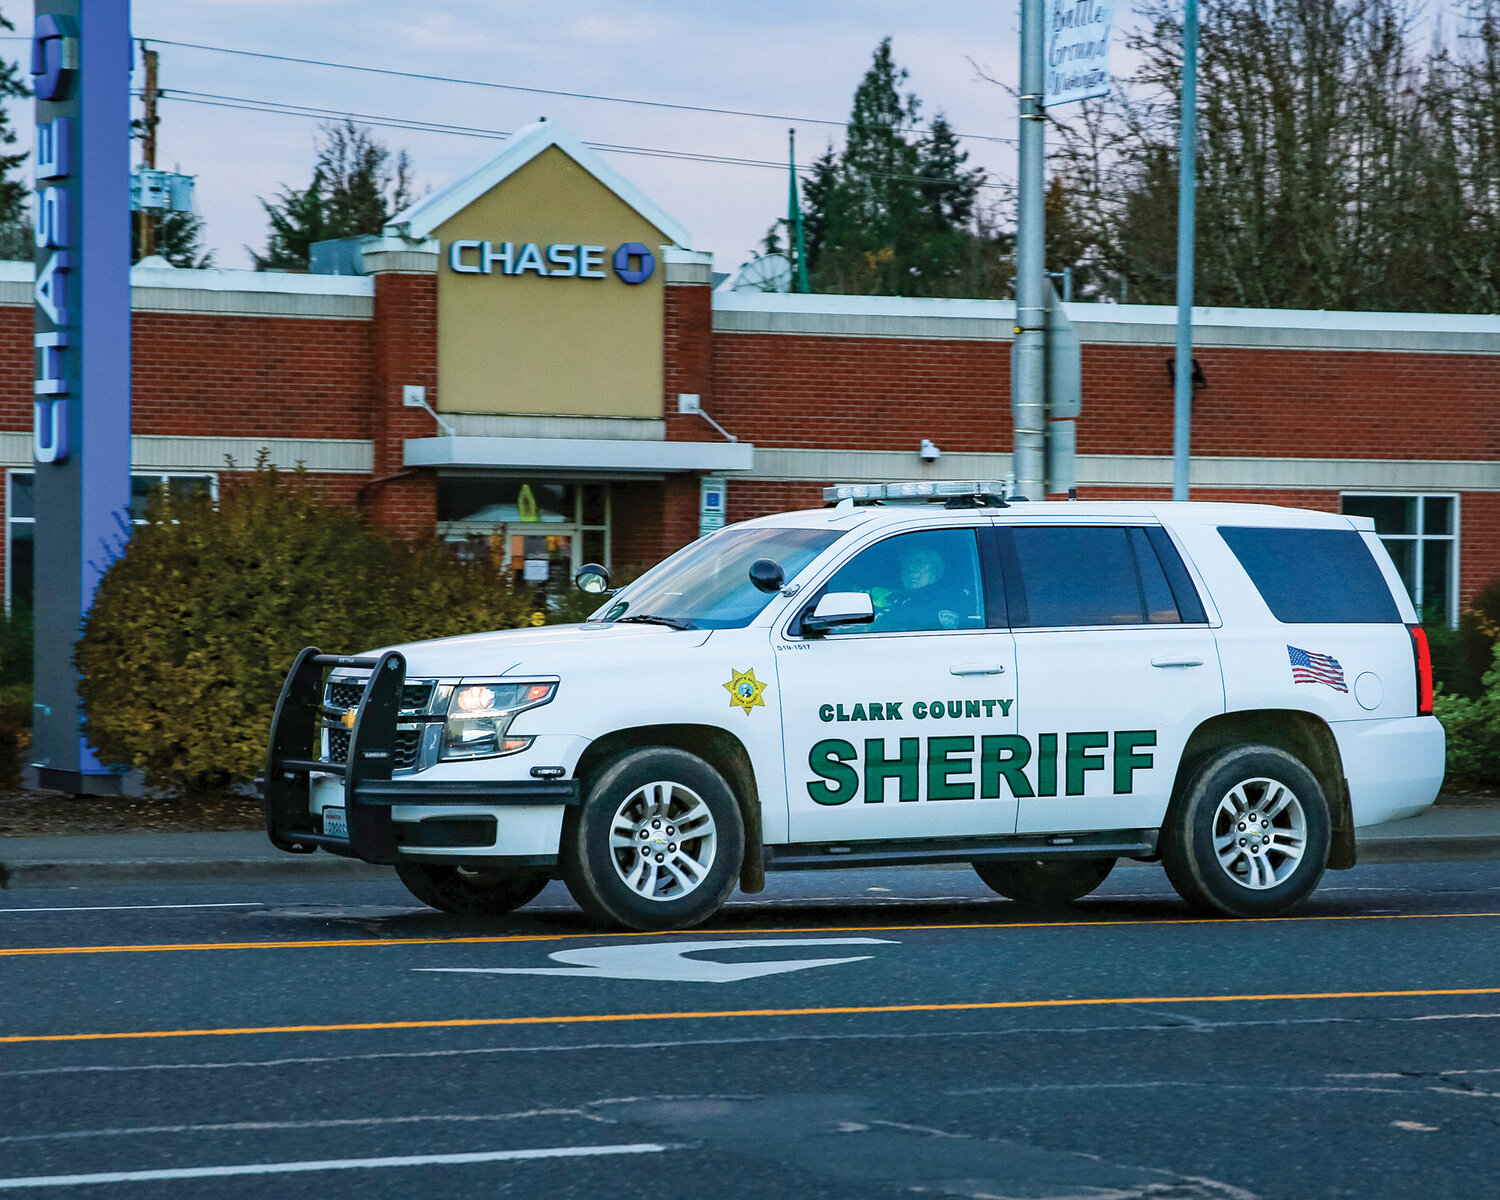 A Clark County Sheriff’s Office vehicle drives down Main Street in Battle Ground.